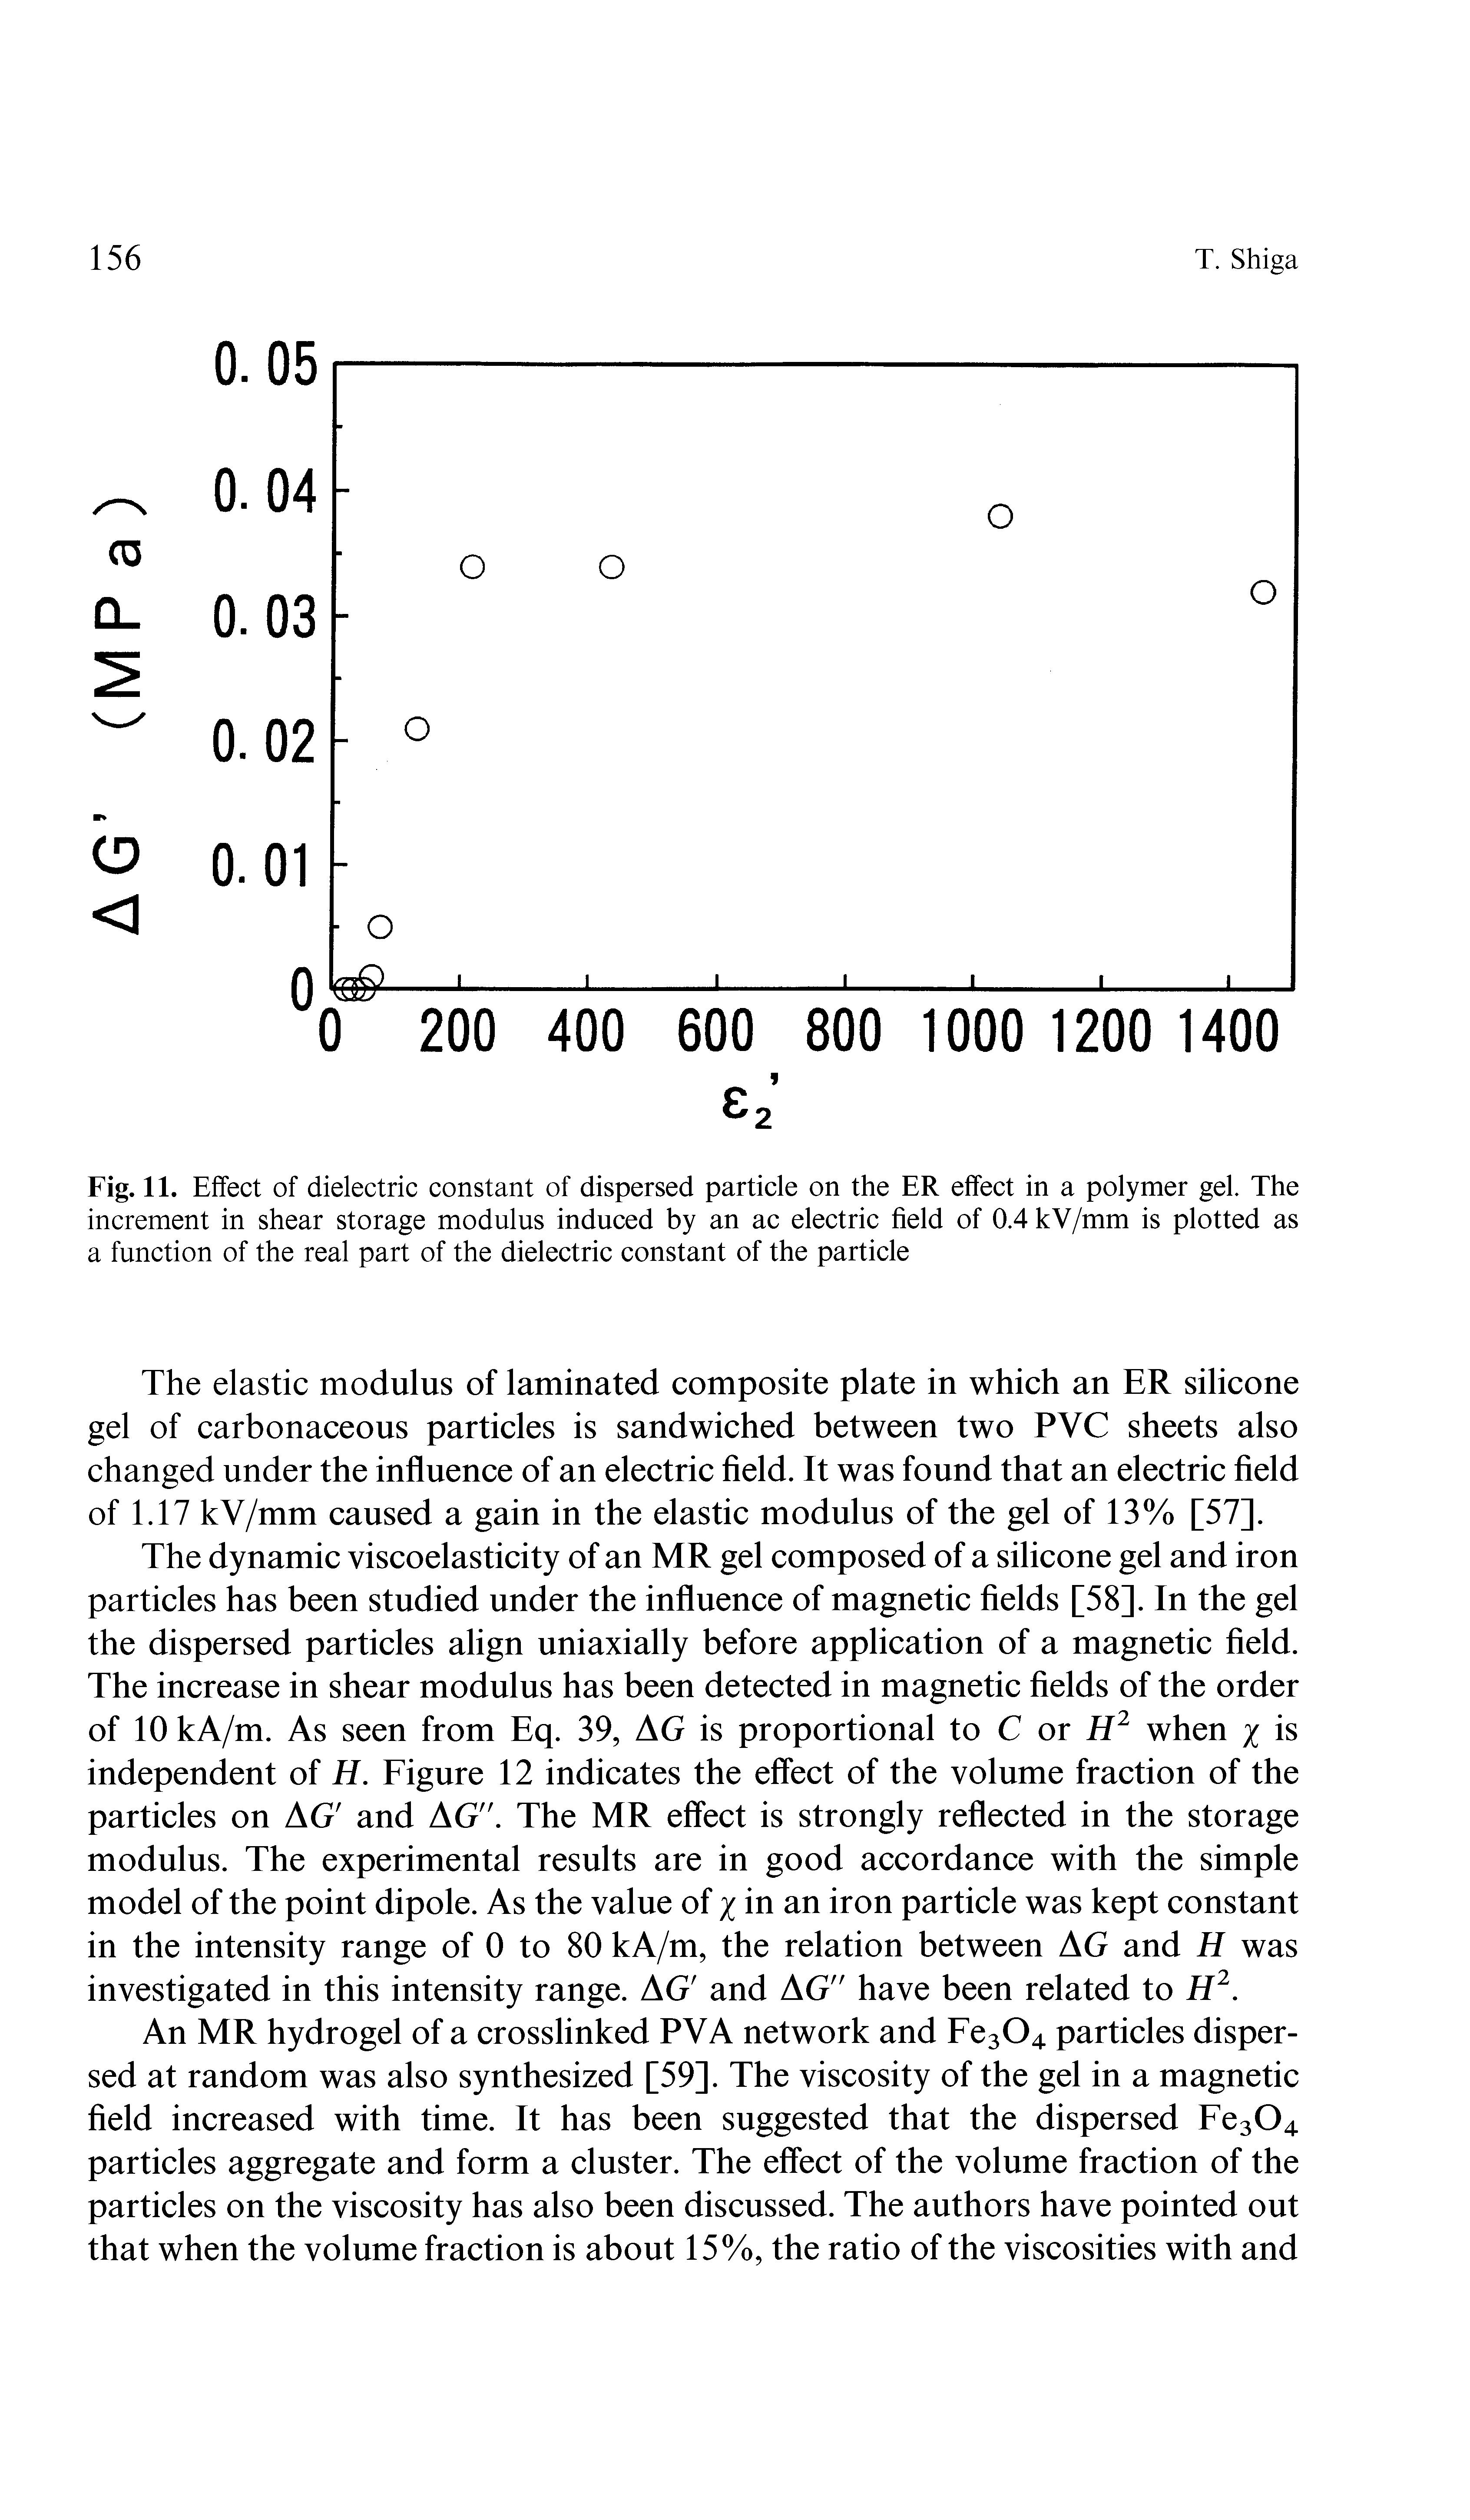 Fig. 11. Effect of dielectric constant of dispersed particle on the ER effect in a polymer gel. The increment in shear storage modulus induced by an ac electric field of 0.4 kV/mm is plotted as a function of the real part of the dielectric constant of the particle...